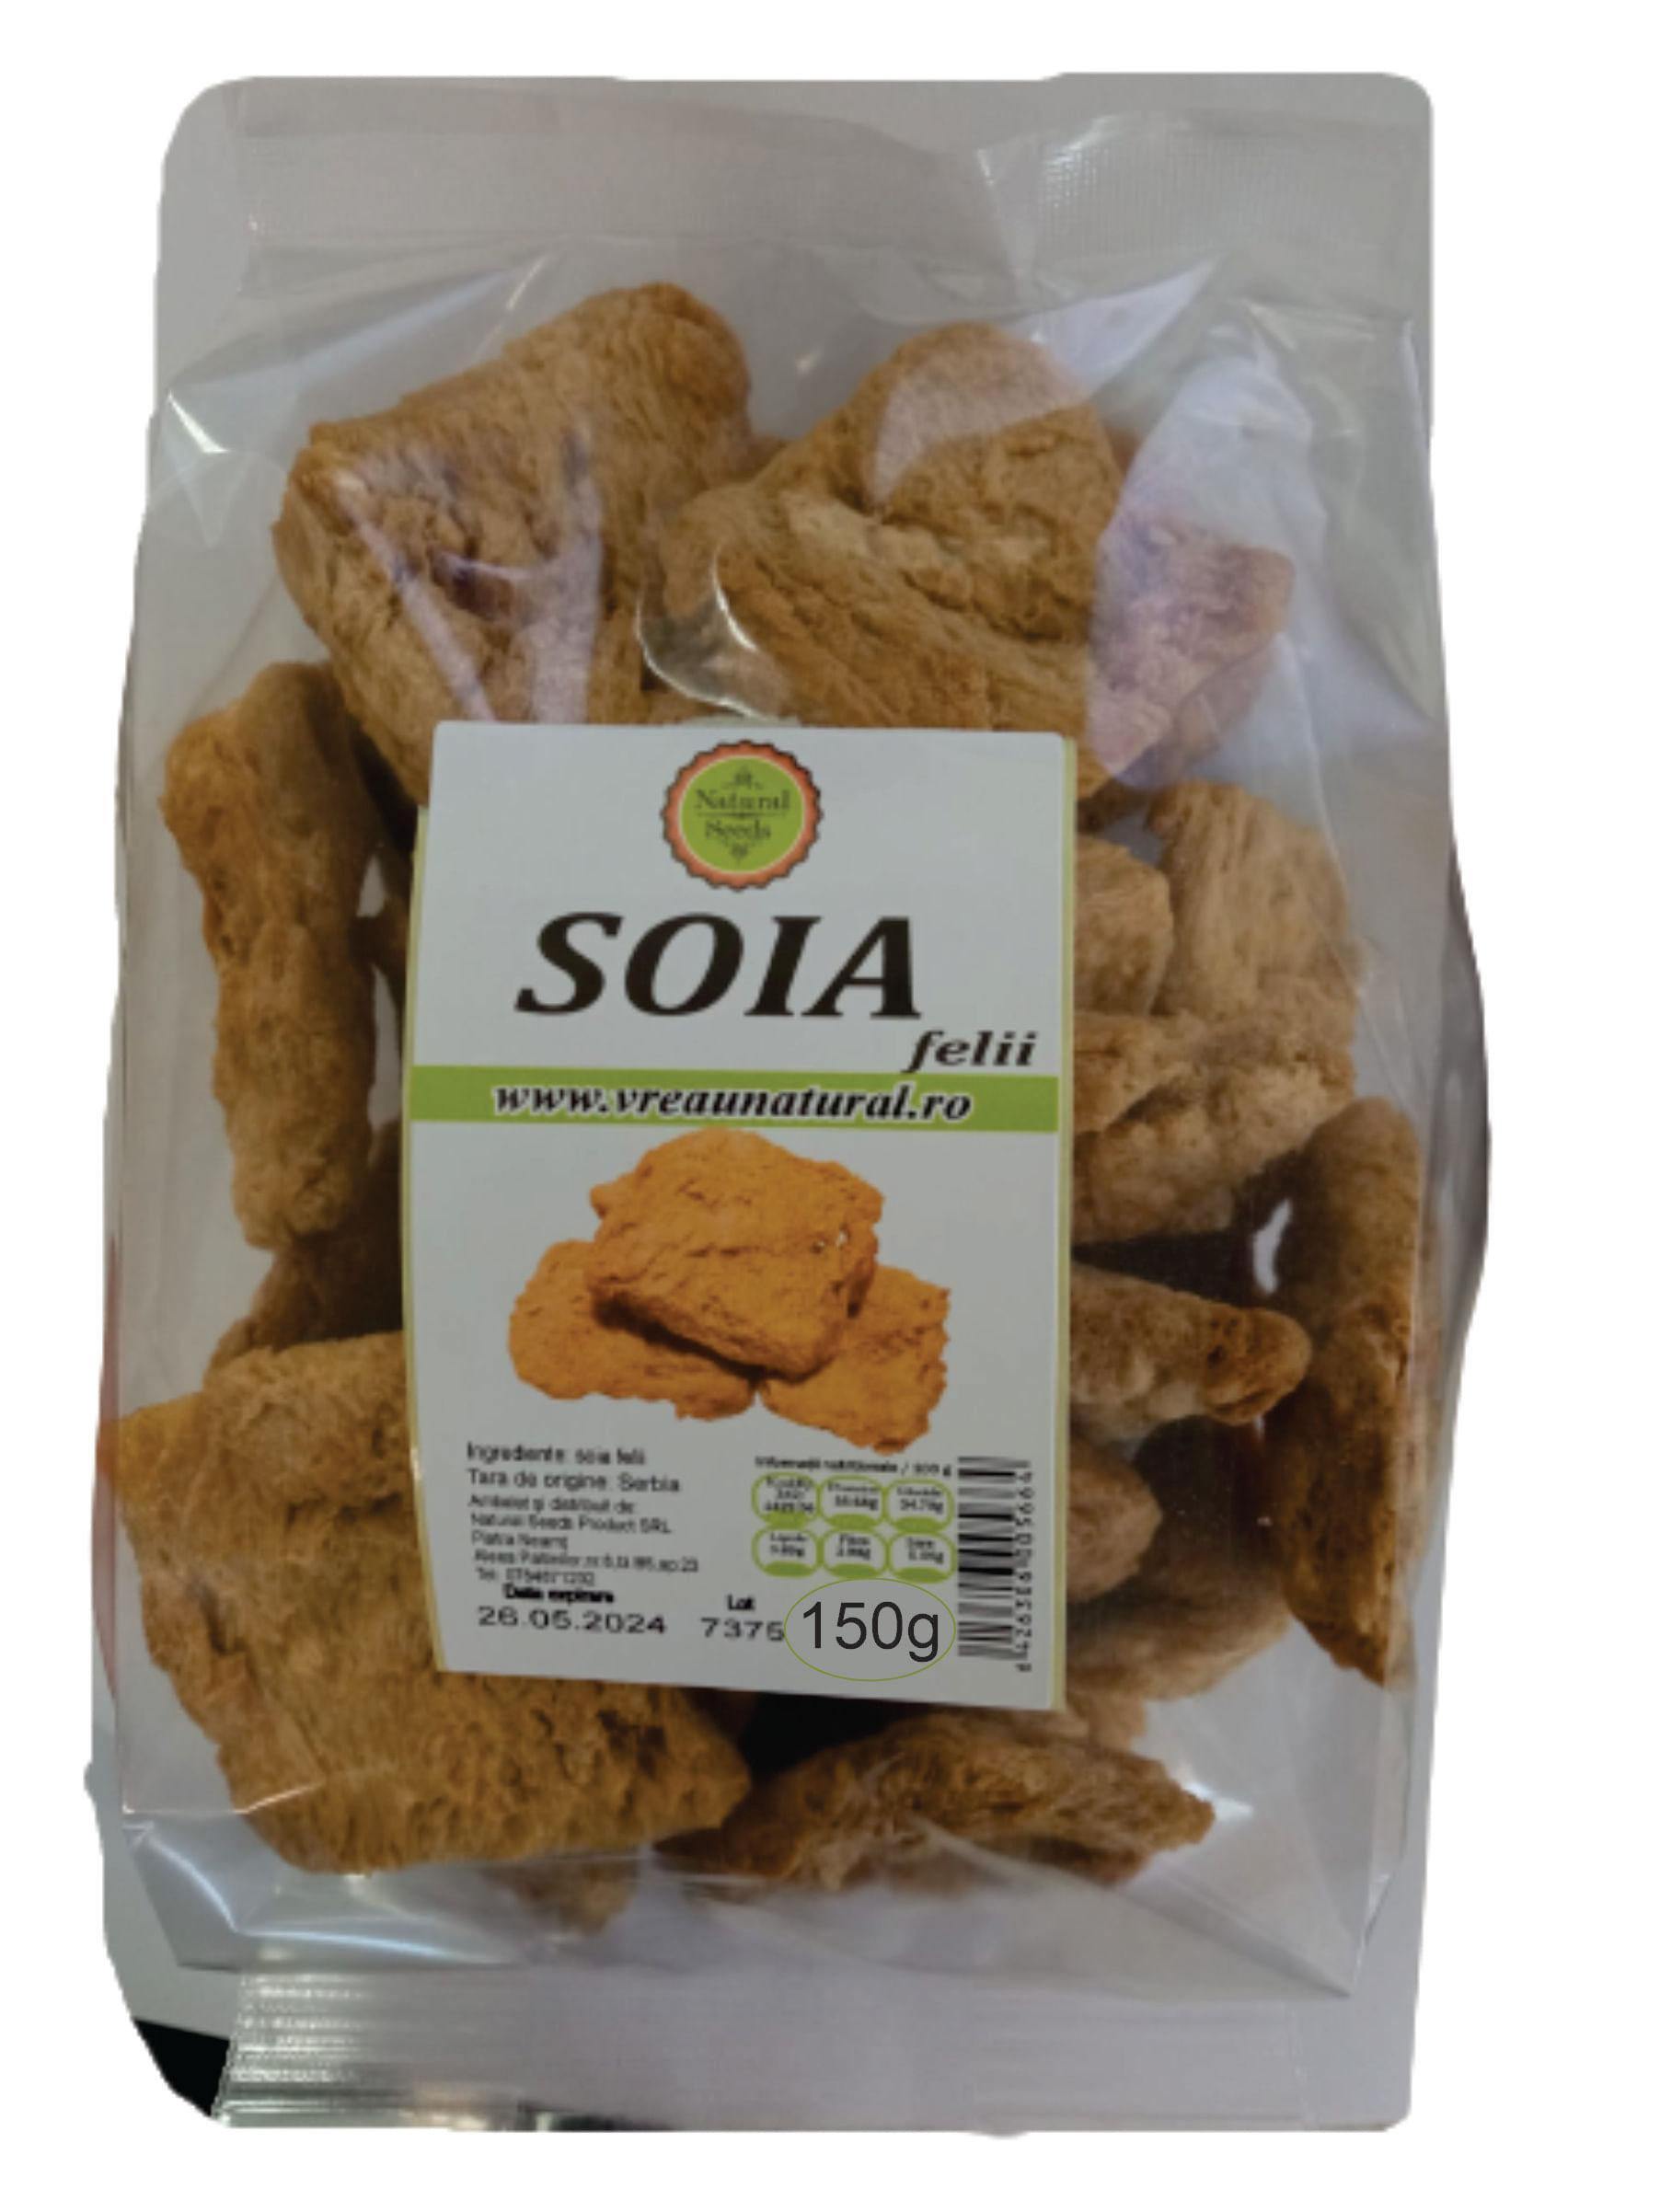 Soia felii, Natural Seeds Product